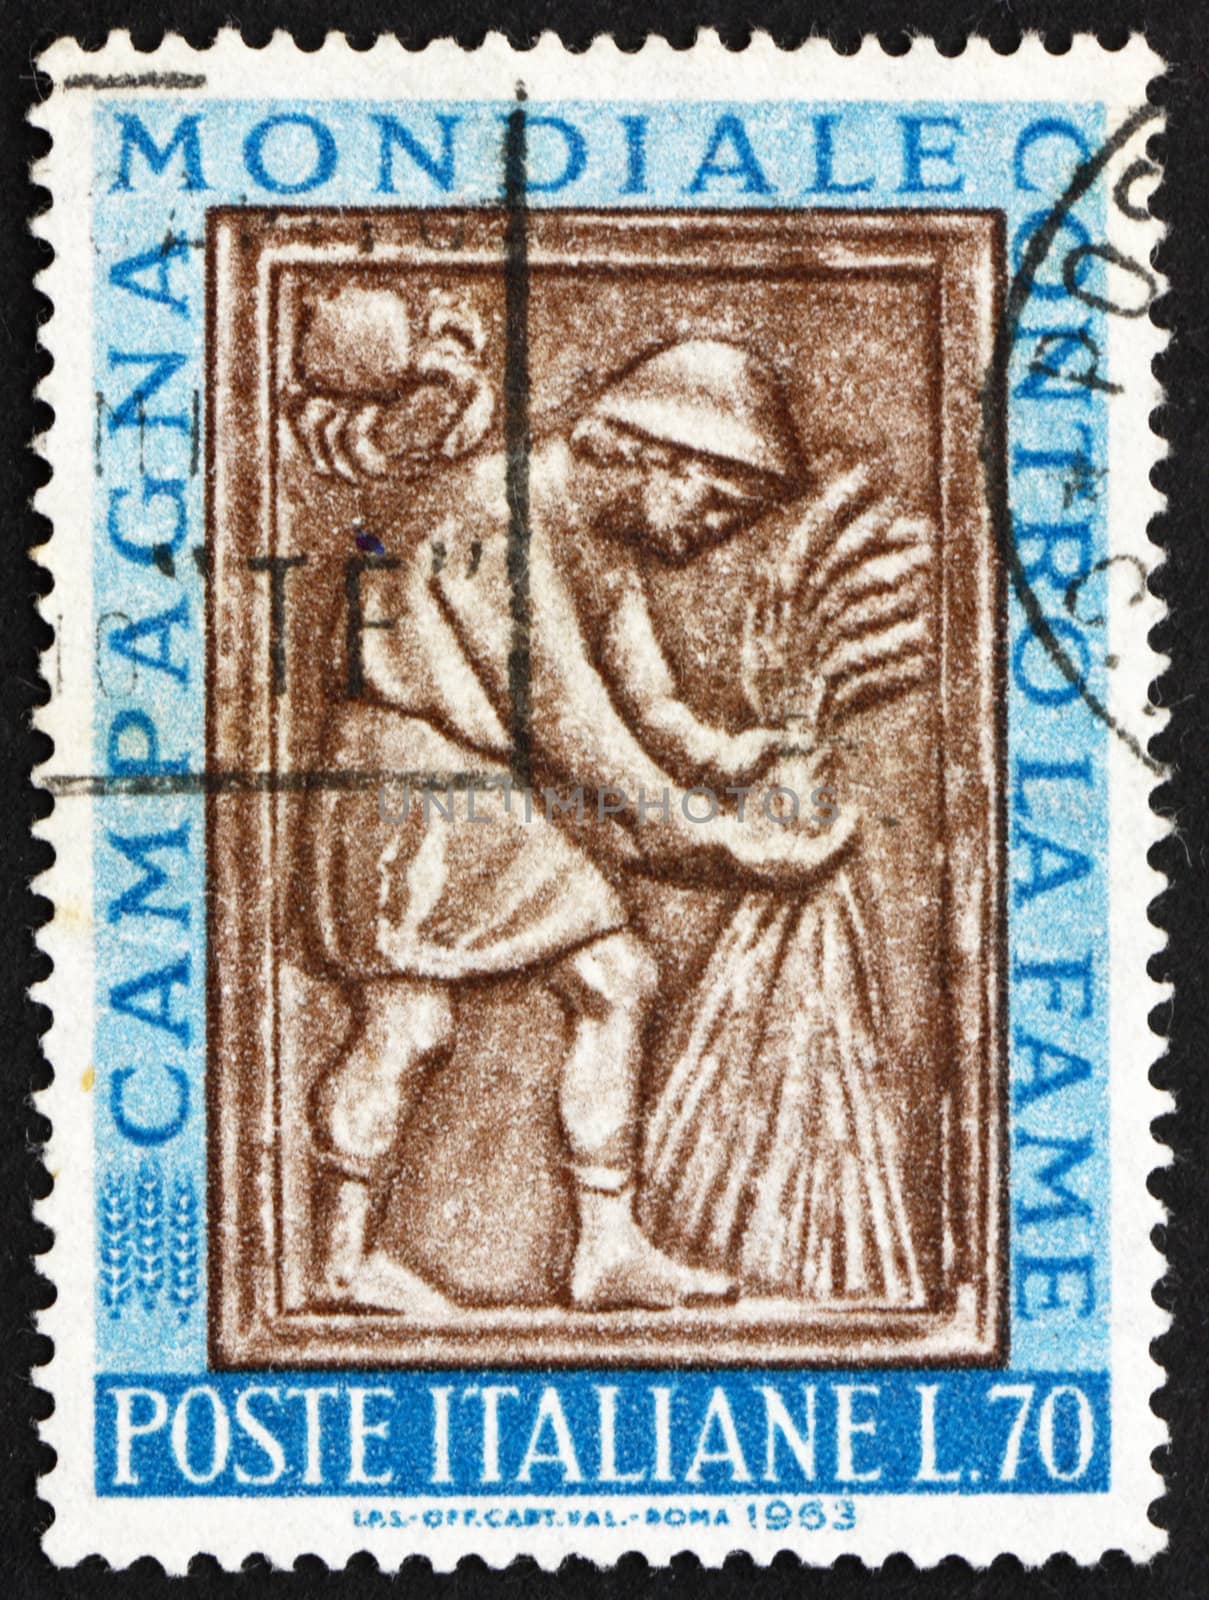 ITALY - CIRCA 1963: a stamp printed in the Italy shows Harvester Tying Sheaf, Sculpture from Maggiore Fountain, Perugia, Freedom for Hunger, circa 1963